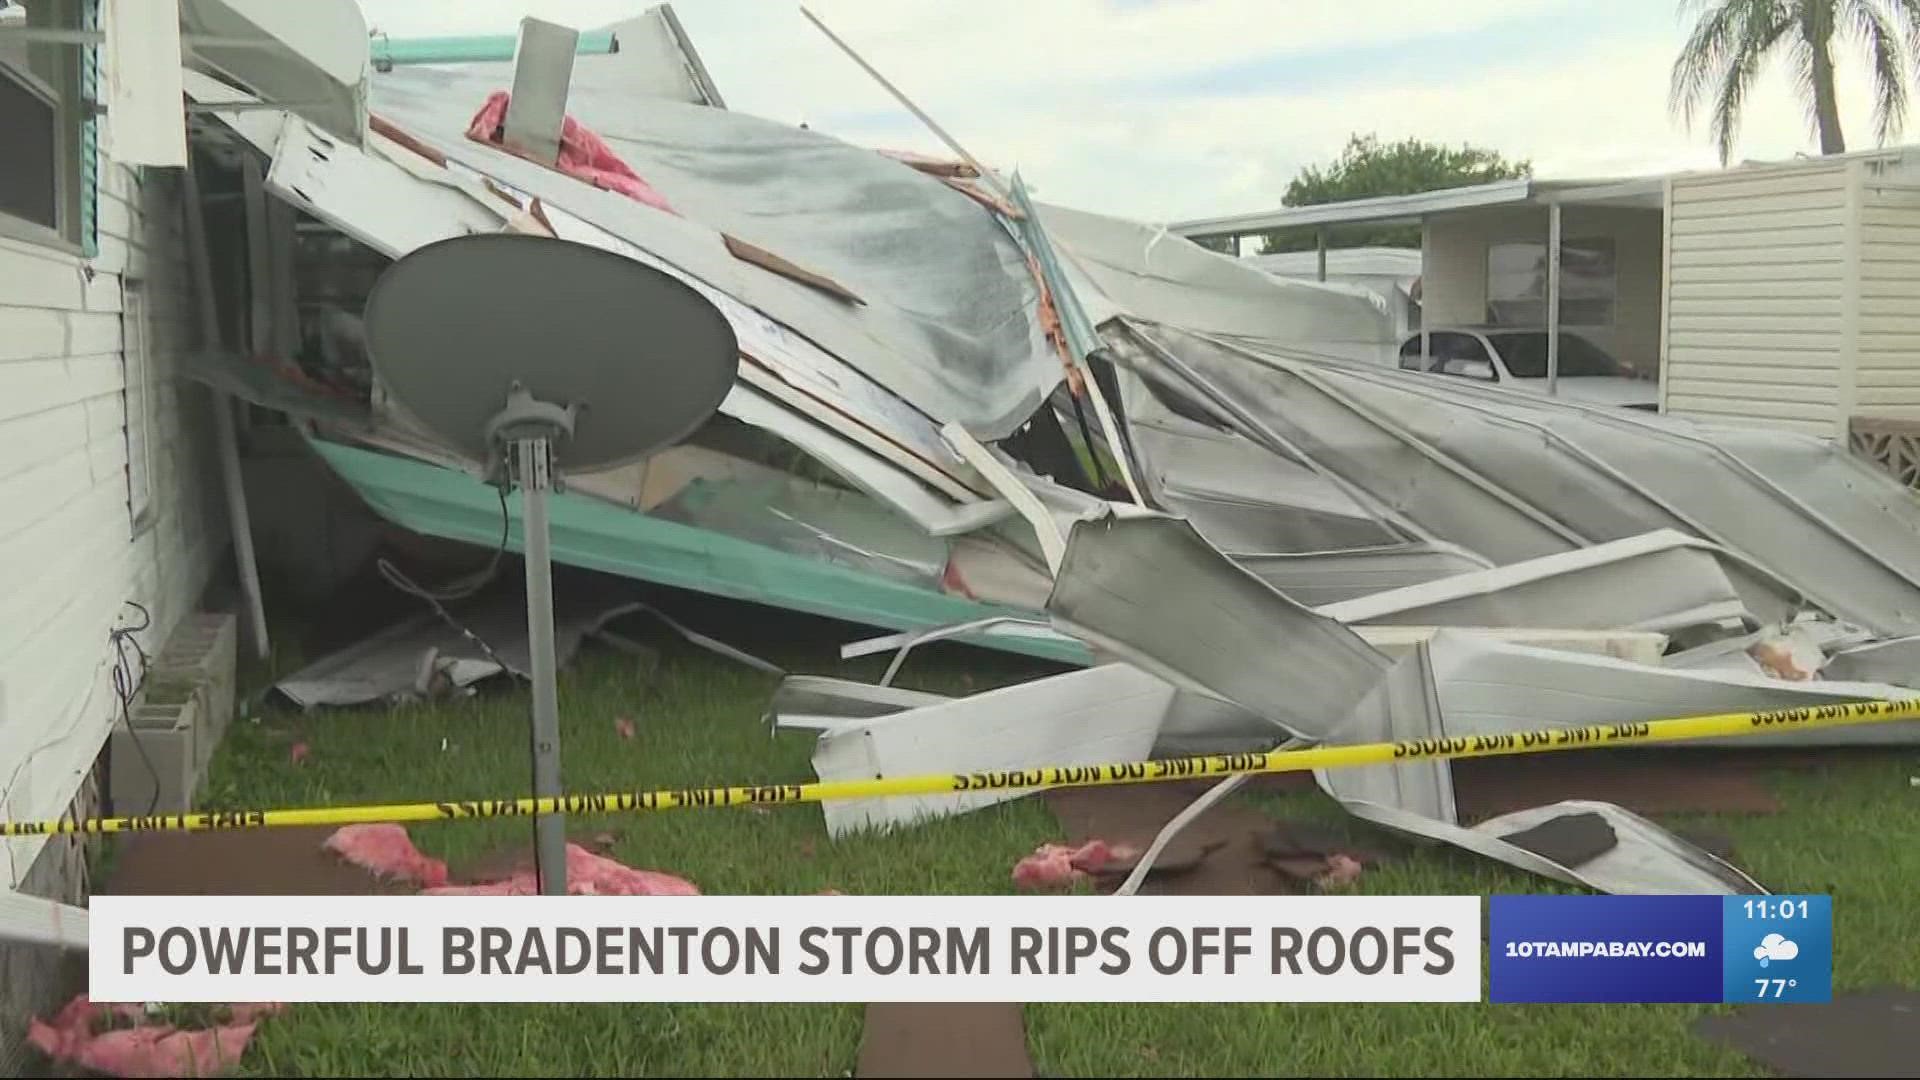 The National Weather Service believes there may have been enough wind shear and force to induce a brief tornado.